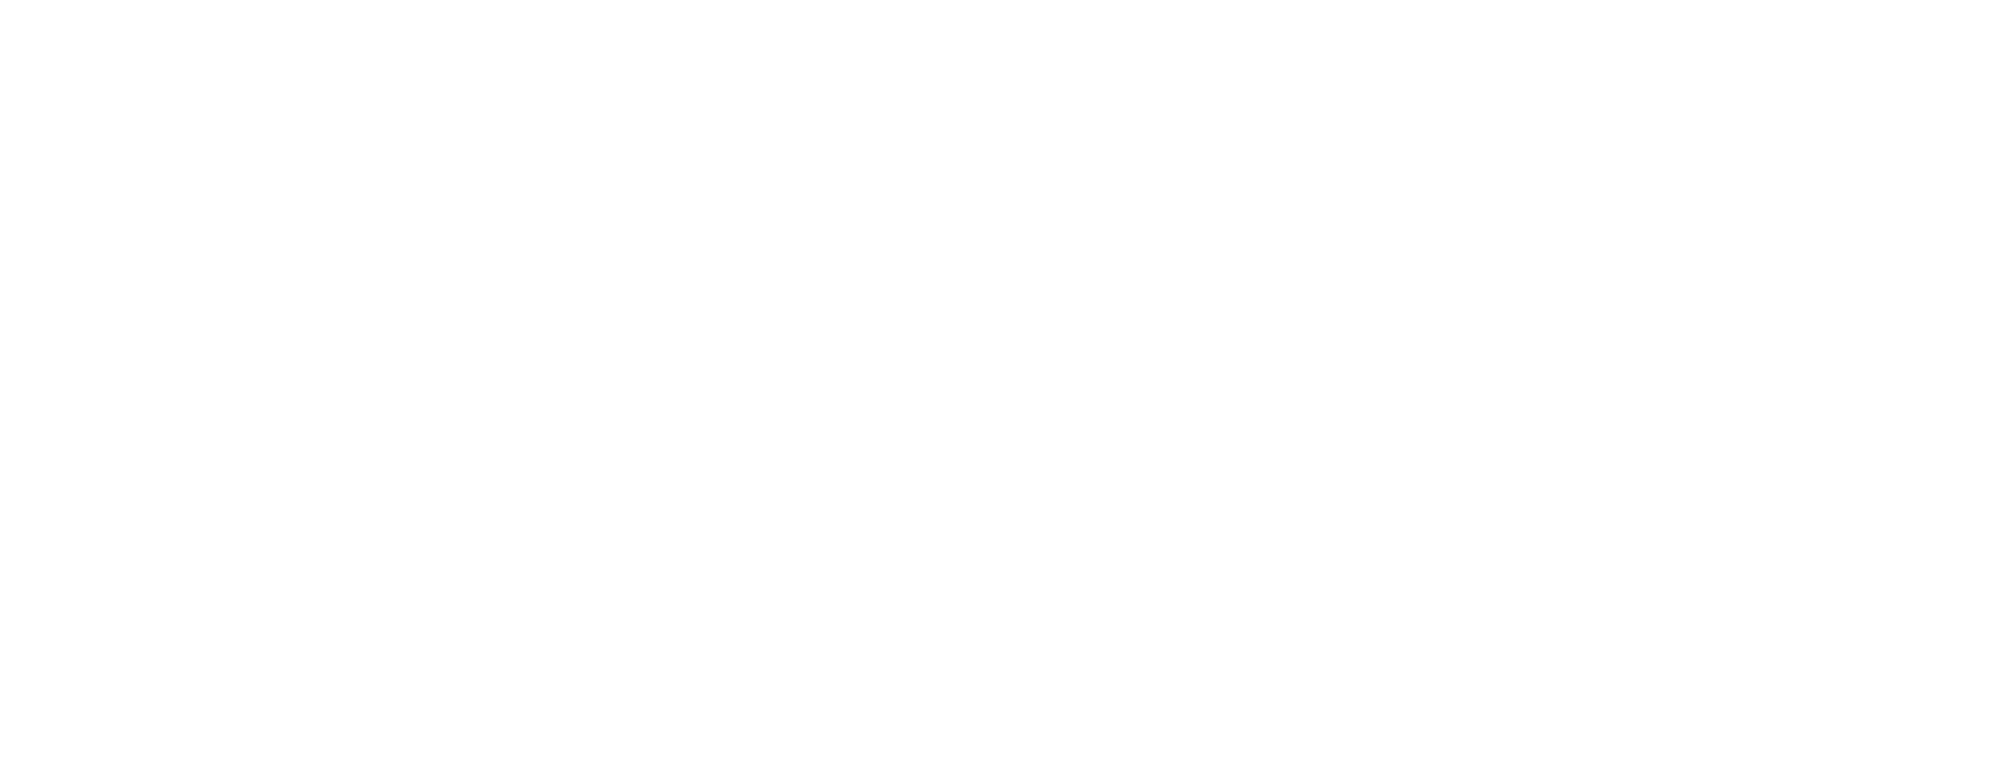 OpenFF Toolkit 0.14.1+0.g8045c15.dirty documentation logo